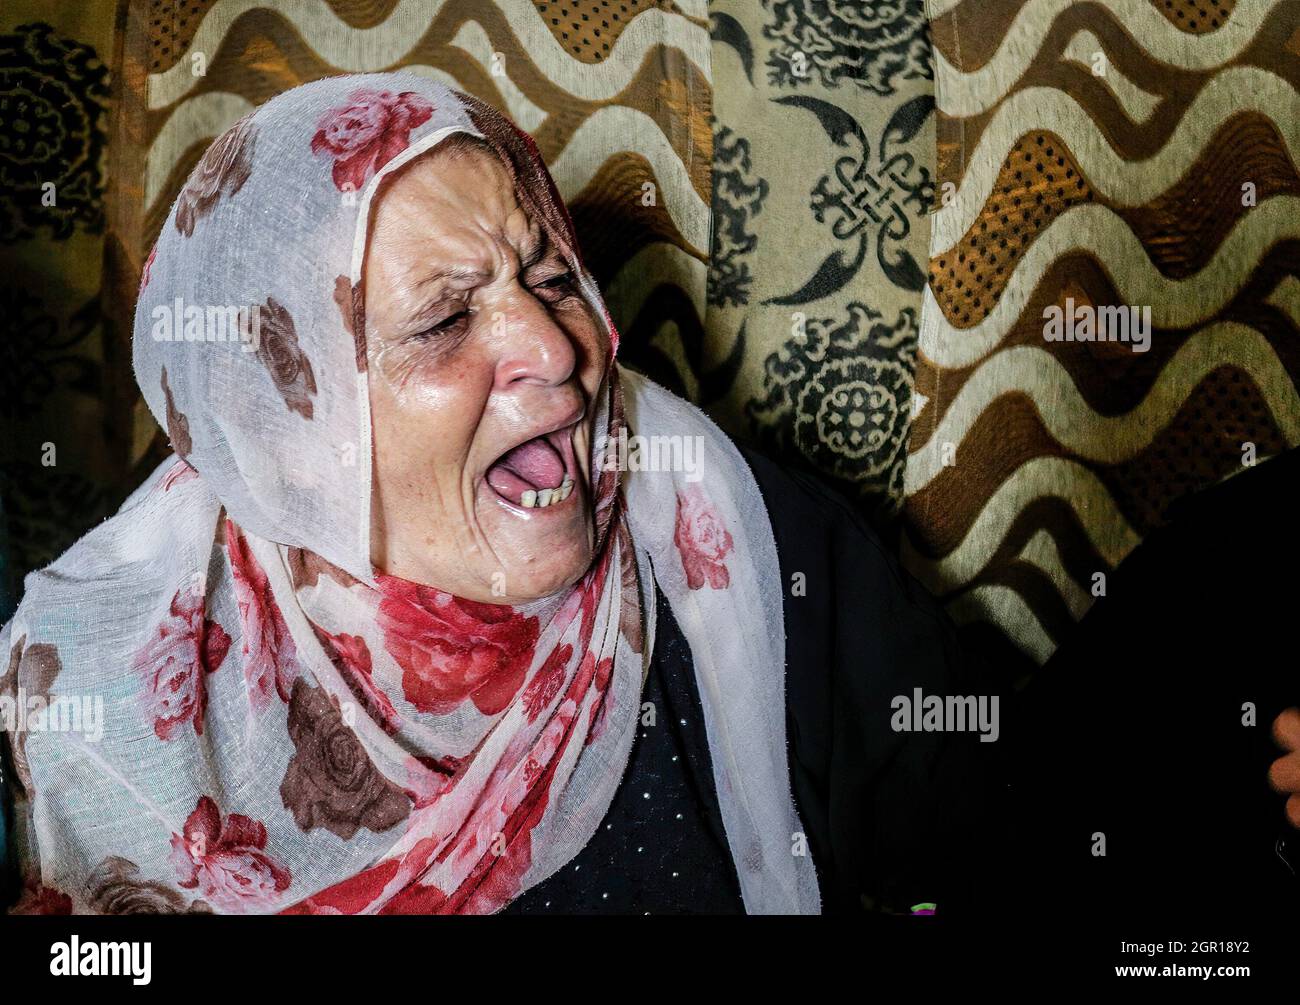 The mother is seen mourning during the funeral of Palestinian Muhammad Abu Ammar, who was shot dead by Israeli soldiers at the border fence between Israel and Gaza, according to the Ministry of Health. (Photo by Mahmoud Issa / SOPA Images/Sipa USA) Stock Photo